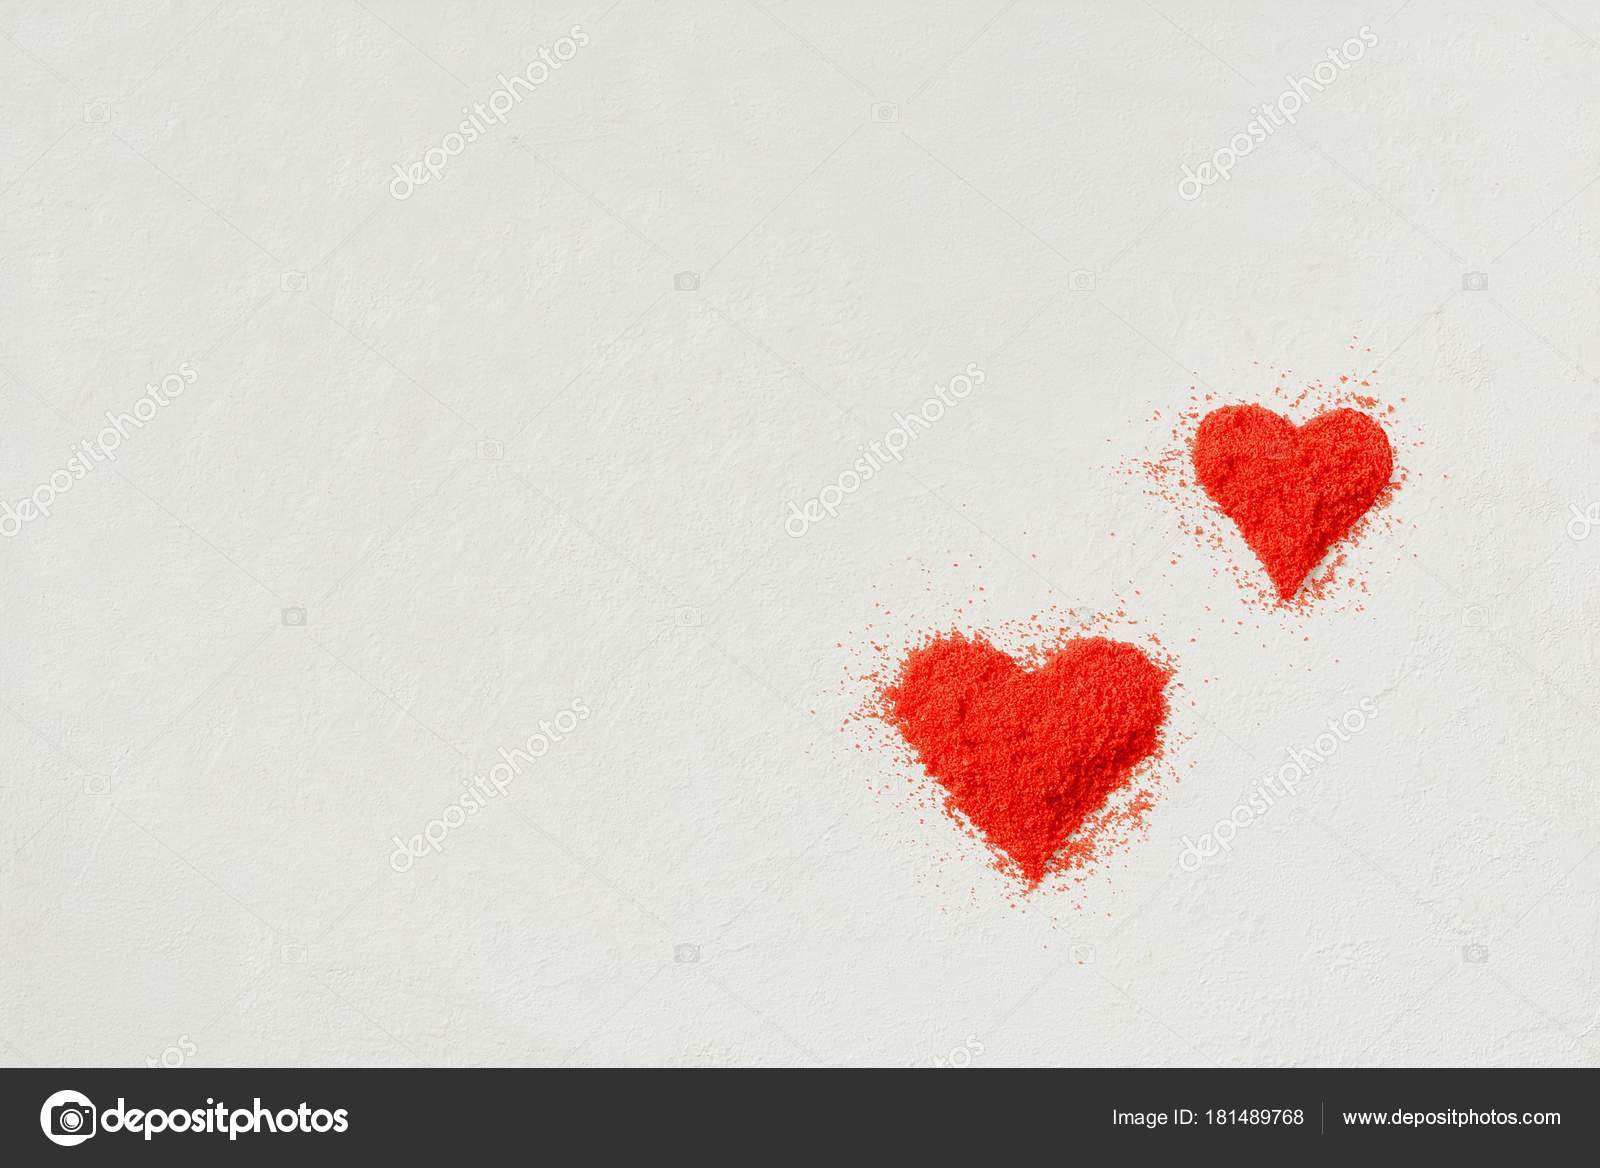 Heart Drawing Ideas Valentine Day Love Symbol Love Heart Drawing Sand Stock Photo C Z Vica